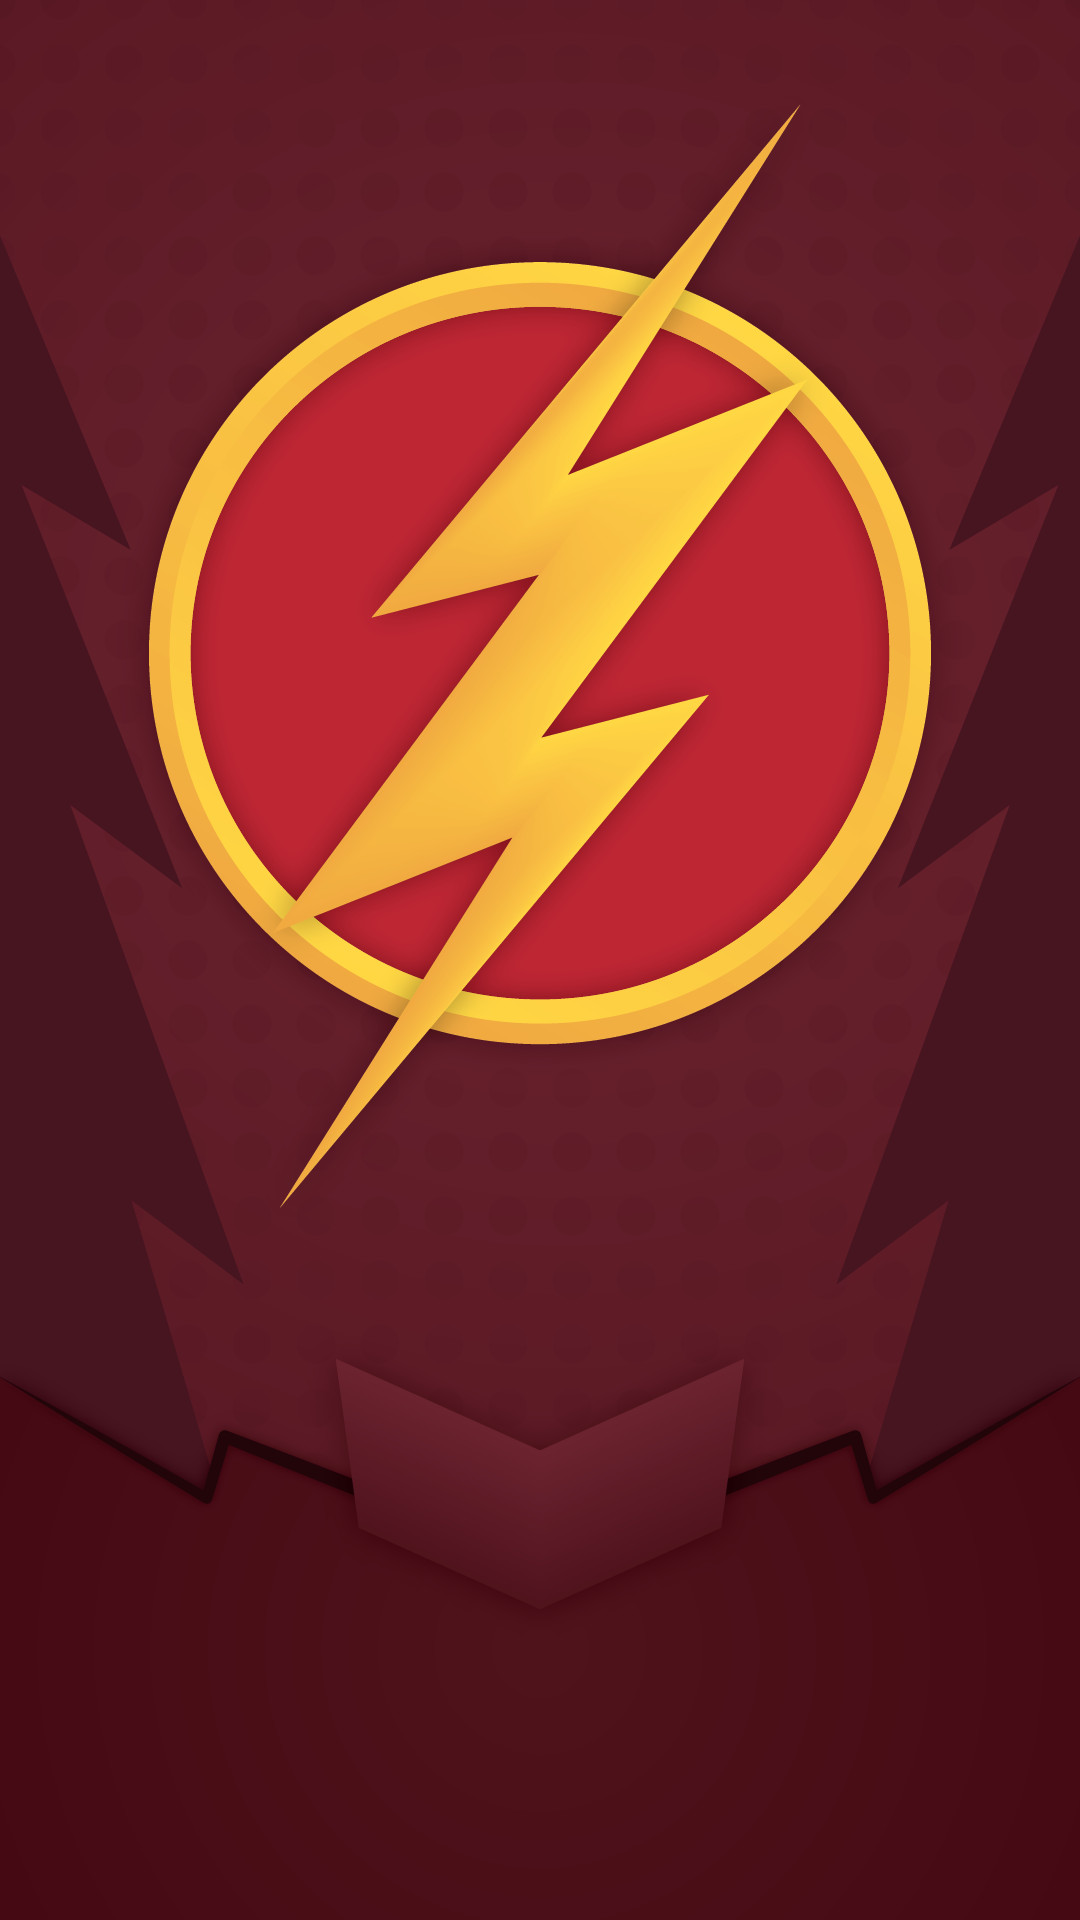 The Flash Wallpaper iPhone 7